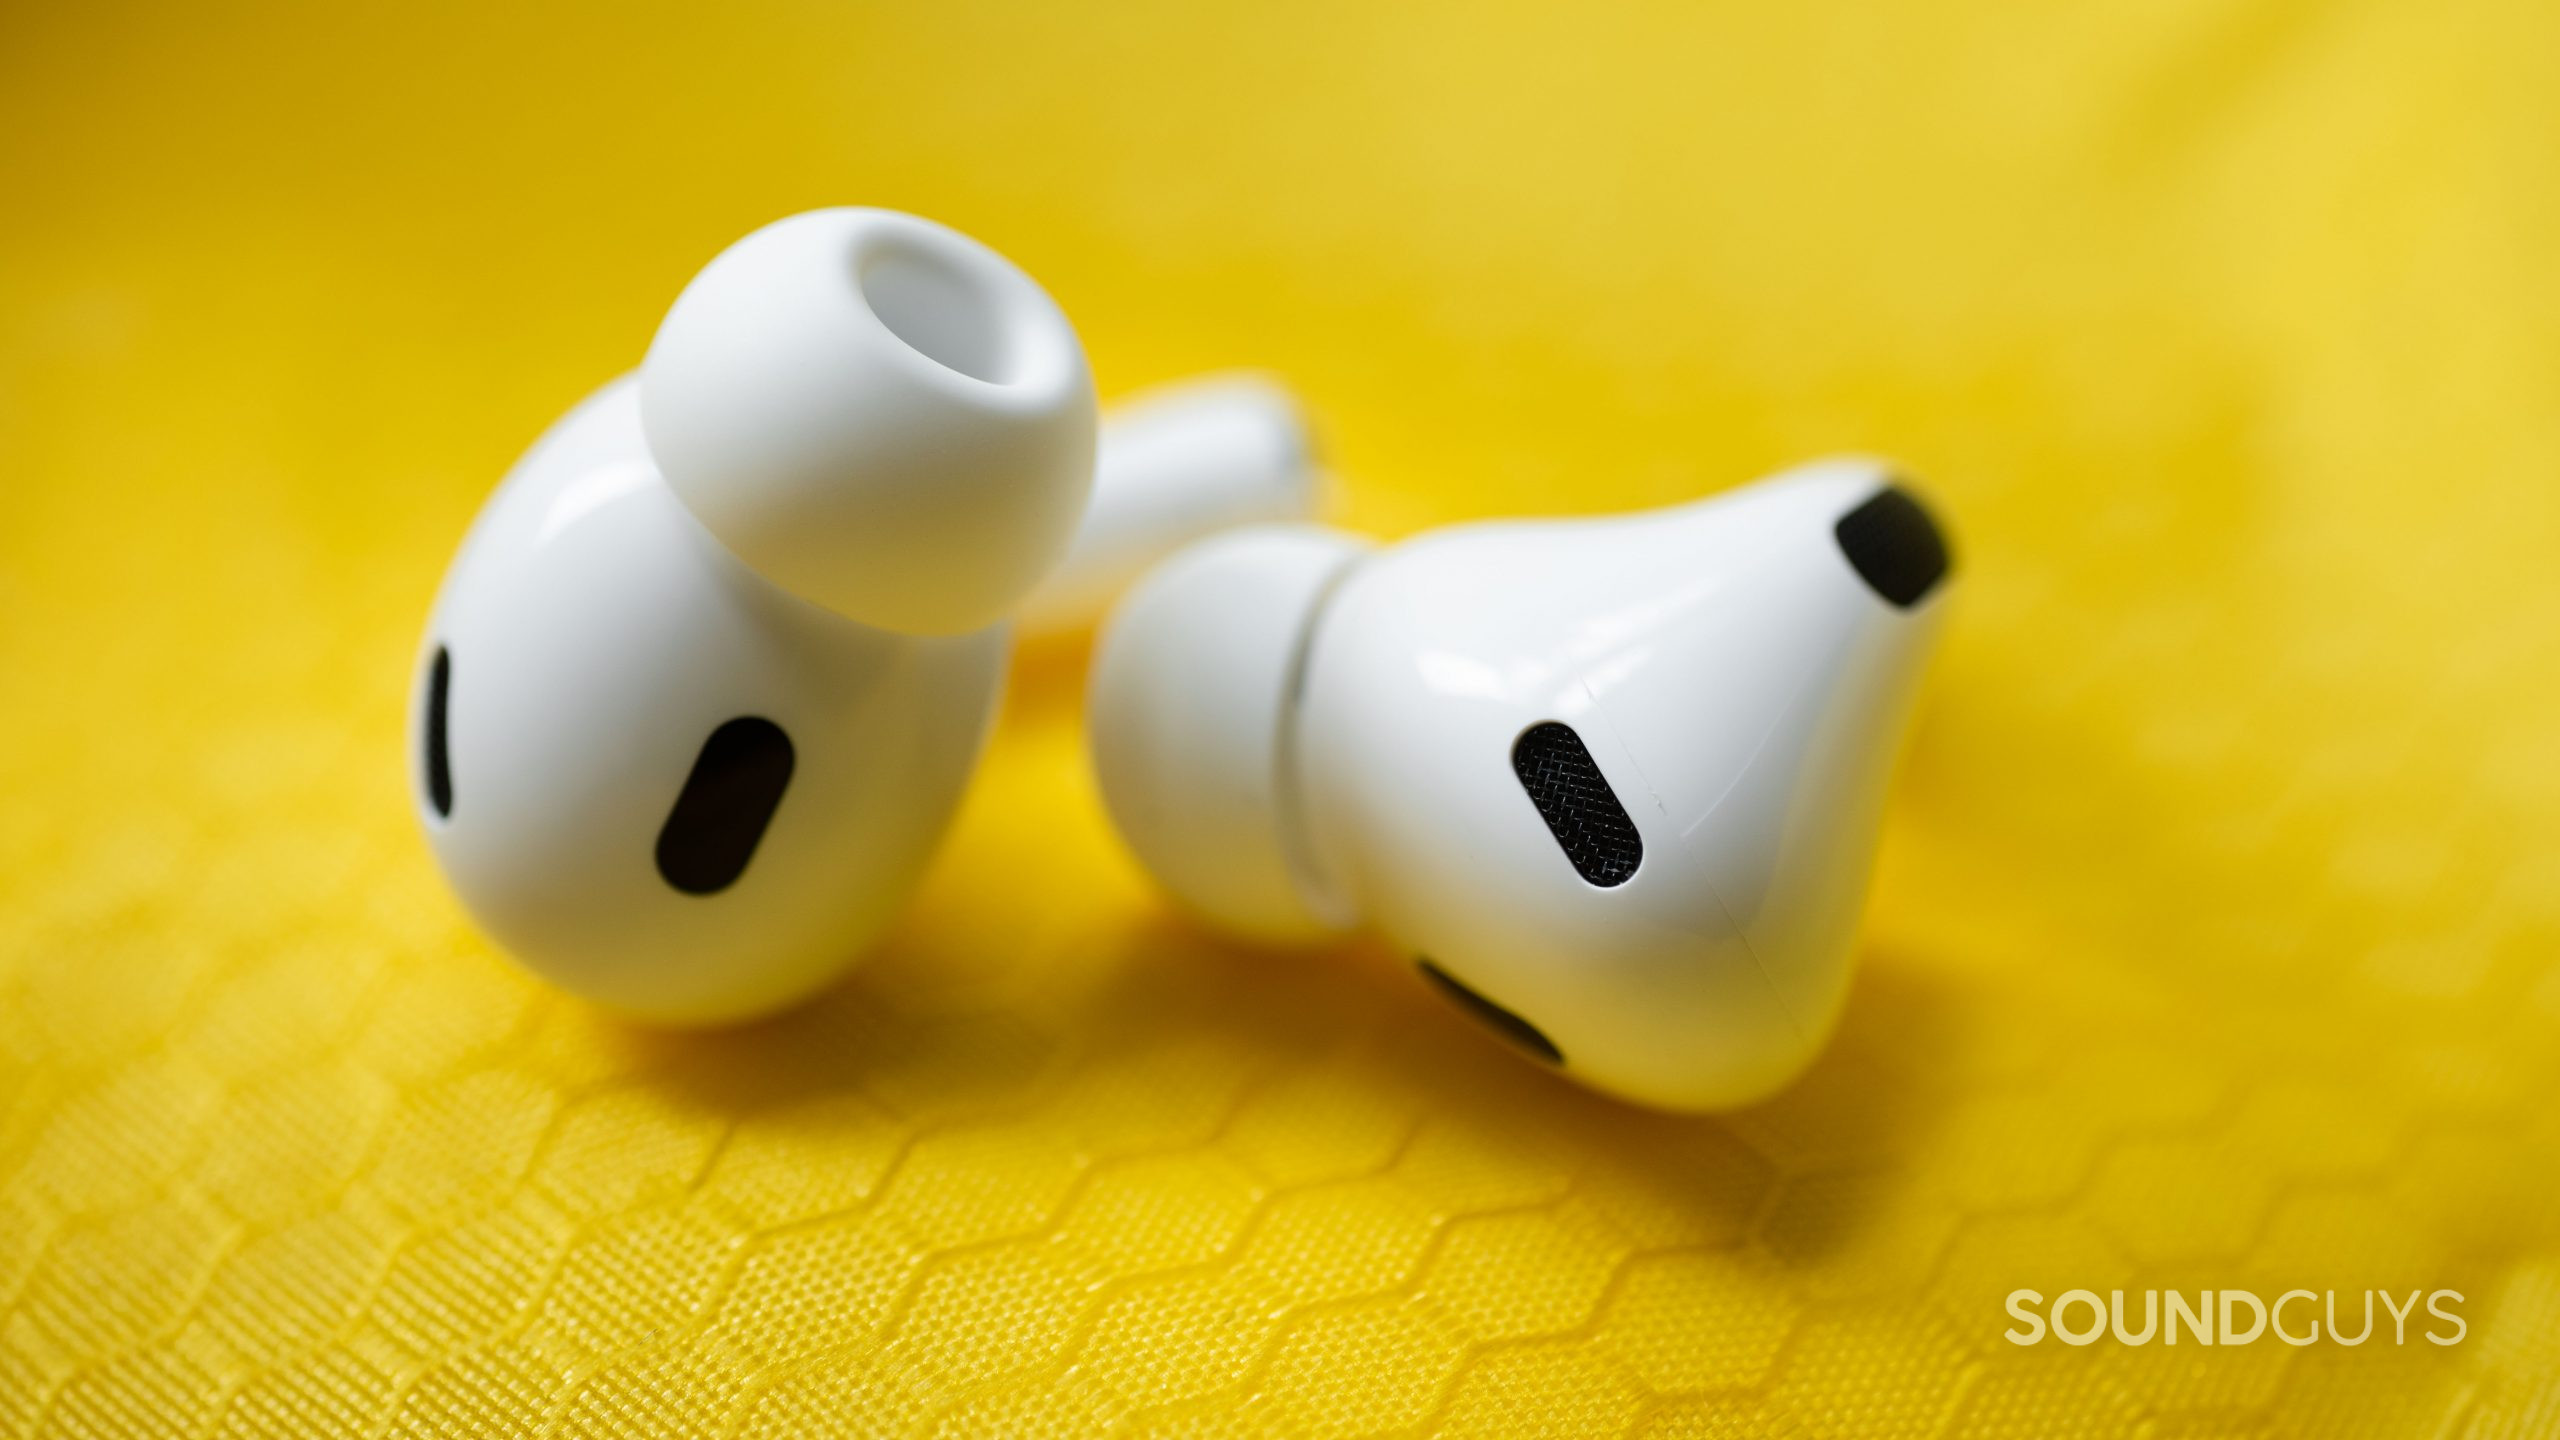 The Apple AirPods Pro (2nd generation) sensors decorate the earbuds which lay on a yellow, textured surface.